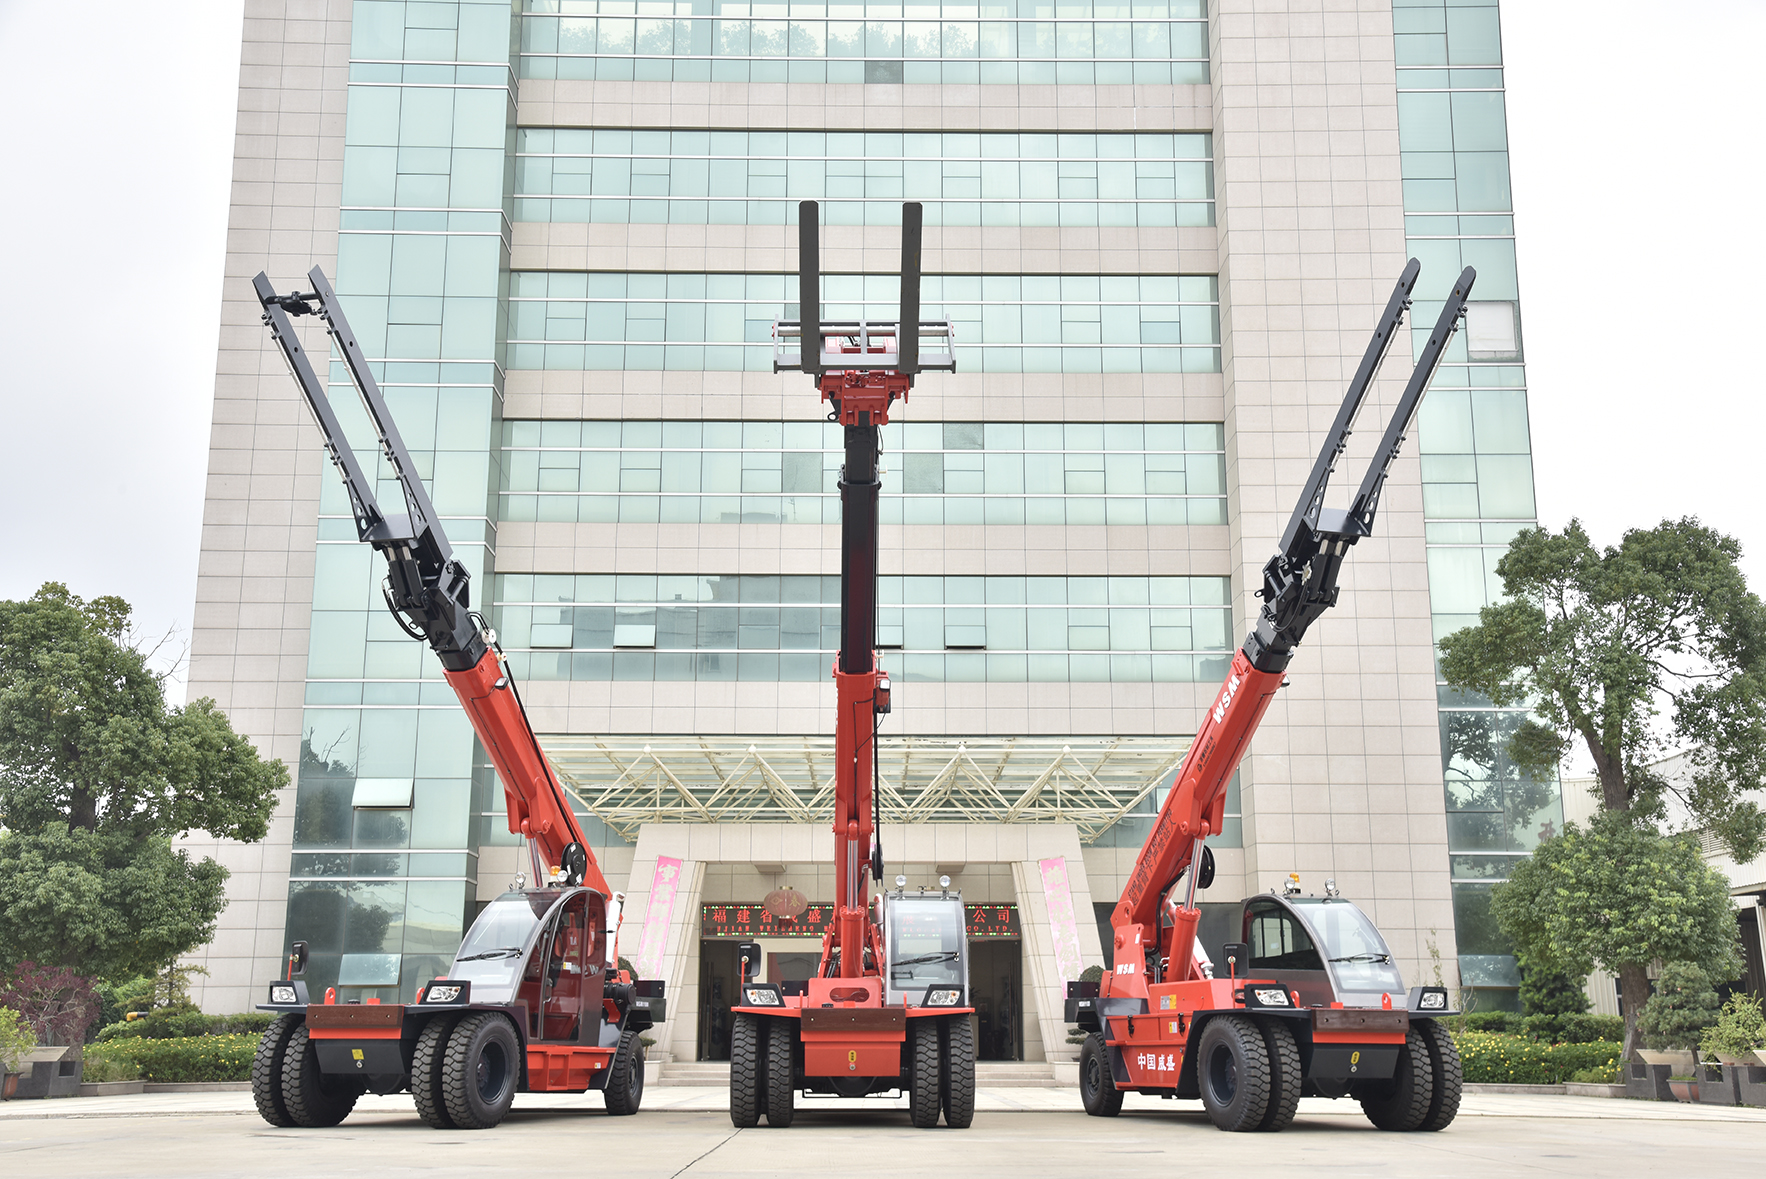 Wilson：The Next Big Thing in Mini Cranes